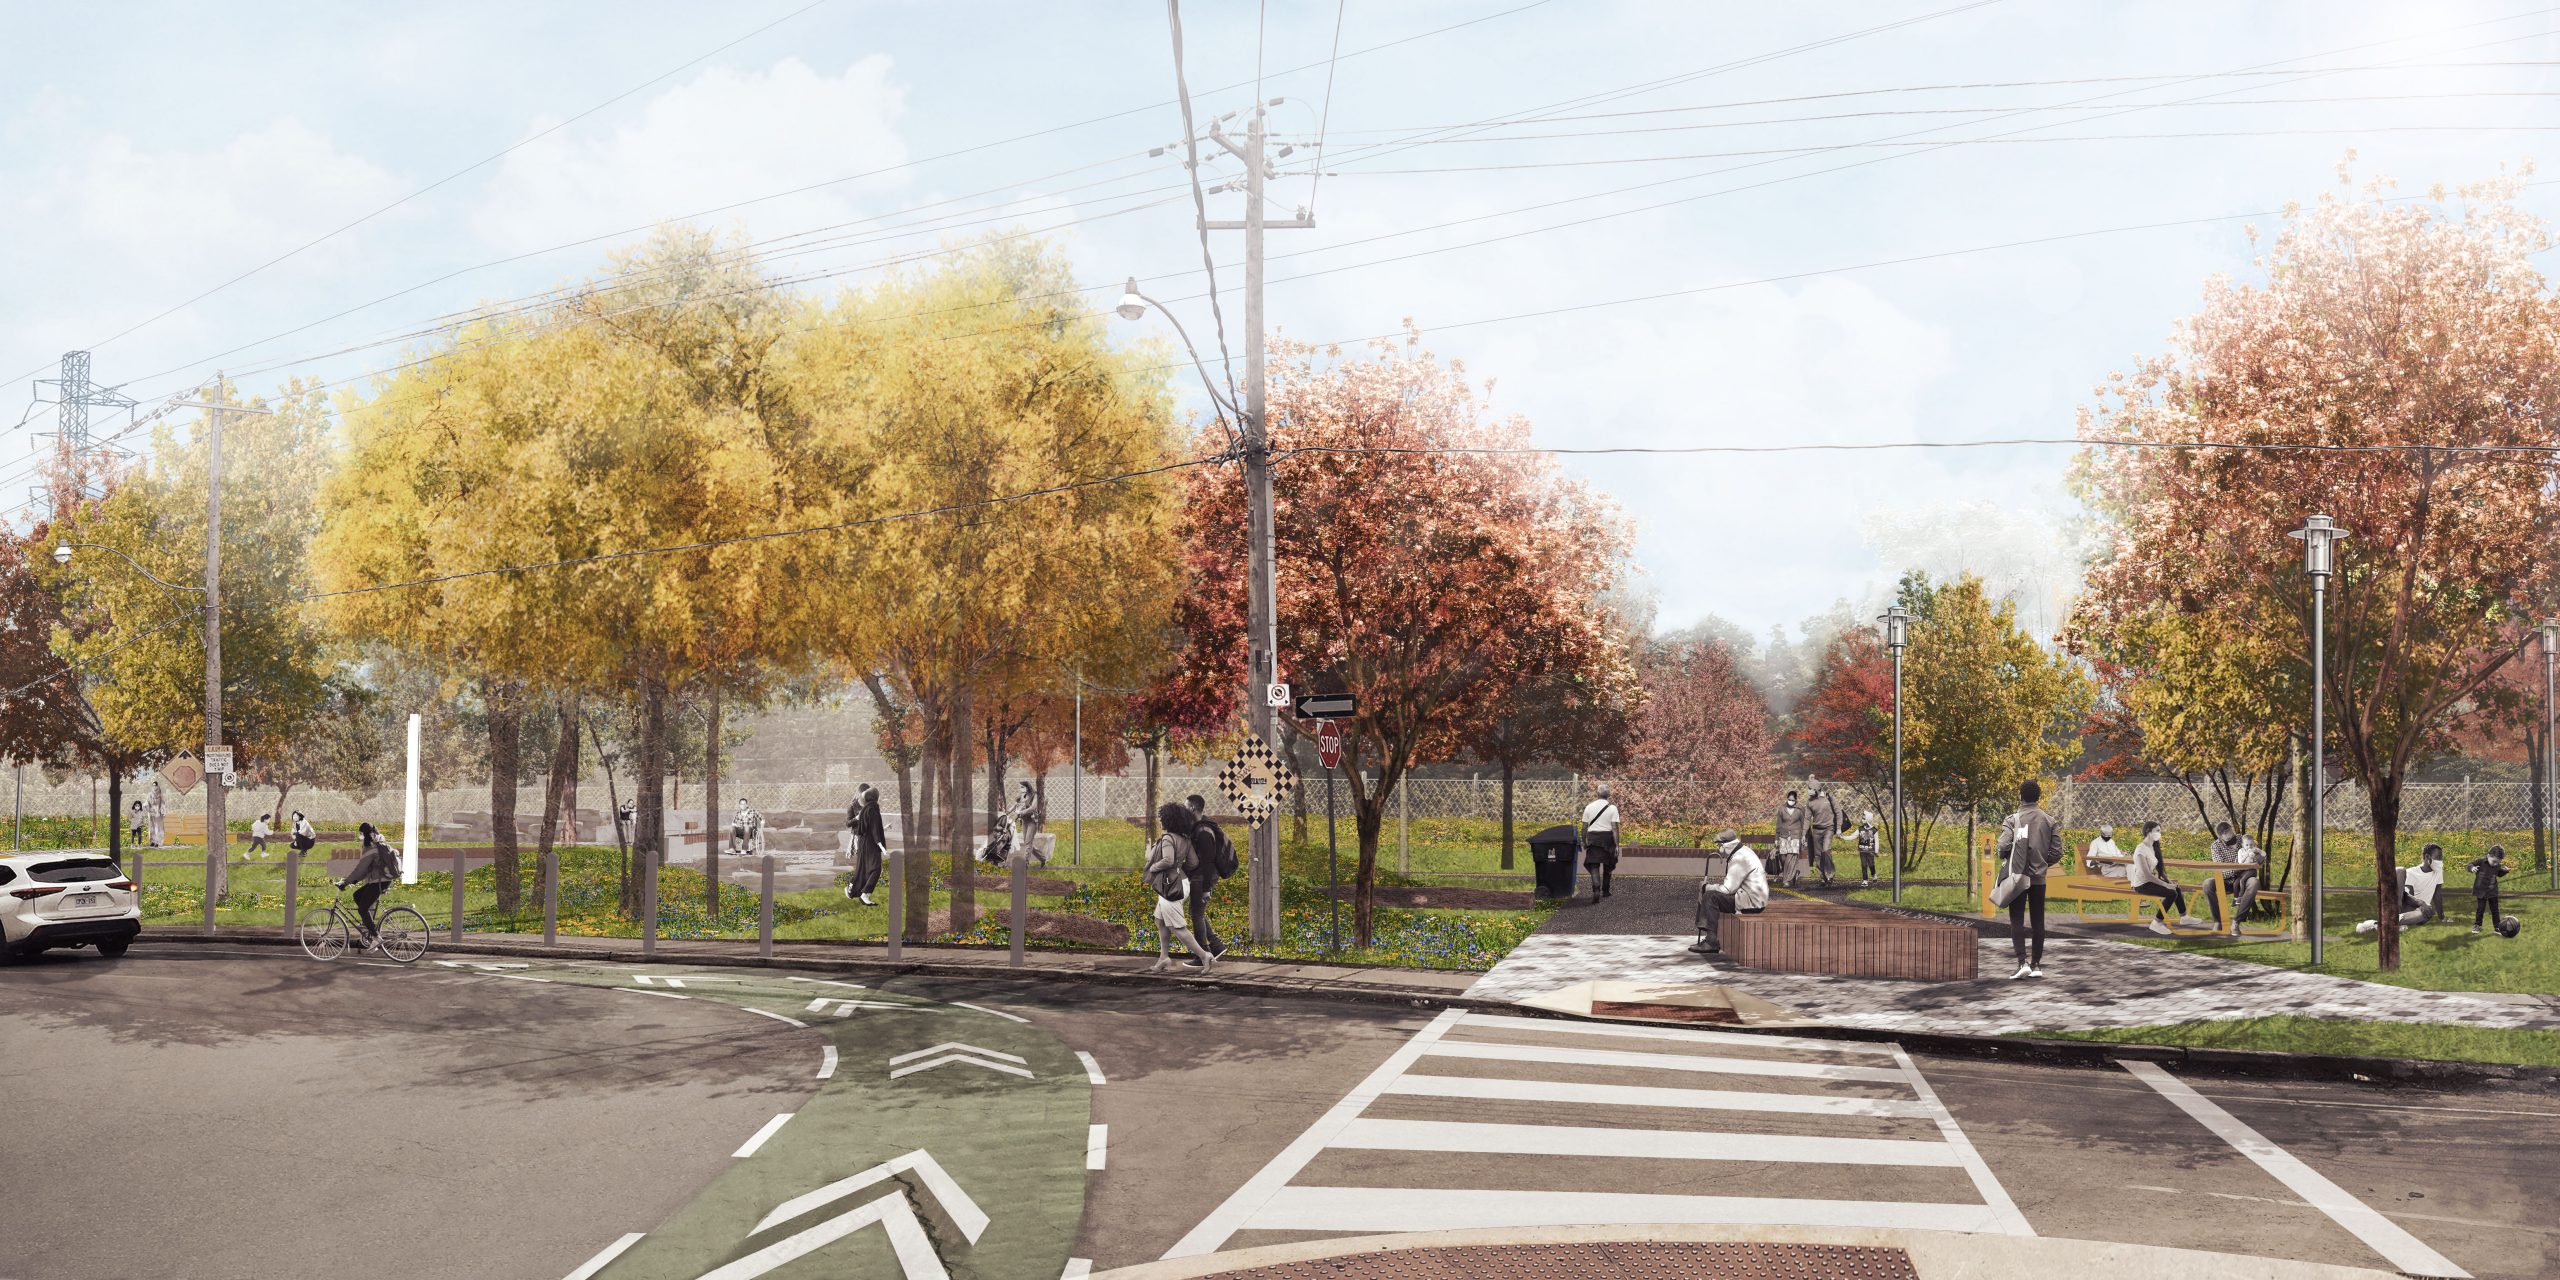 Perspective rendering of the new park at Macpherson Avenue looking South at the central park entrance. Featured in the image are park using the various seating areas, pathways, picnic tables, and the adjacent bike lane.